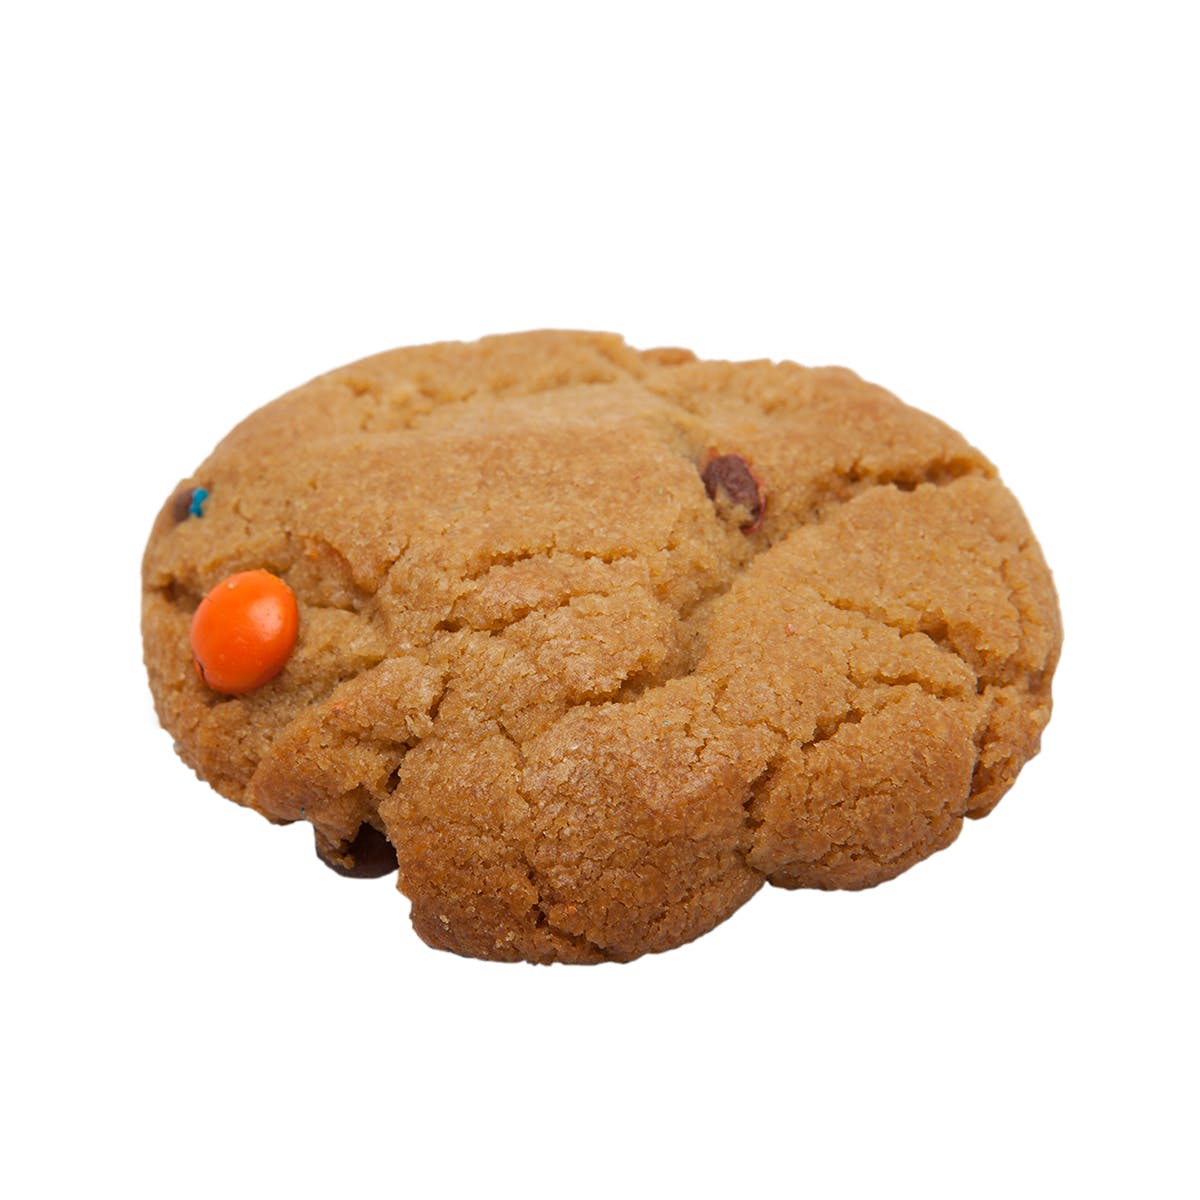 Peanut Butter M&M's Cookie 120 mg THC